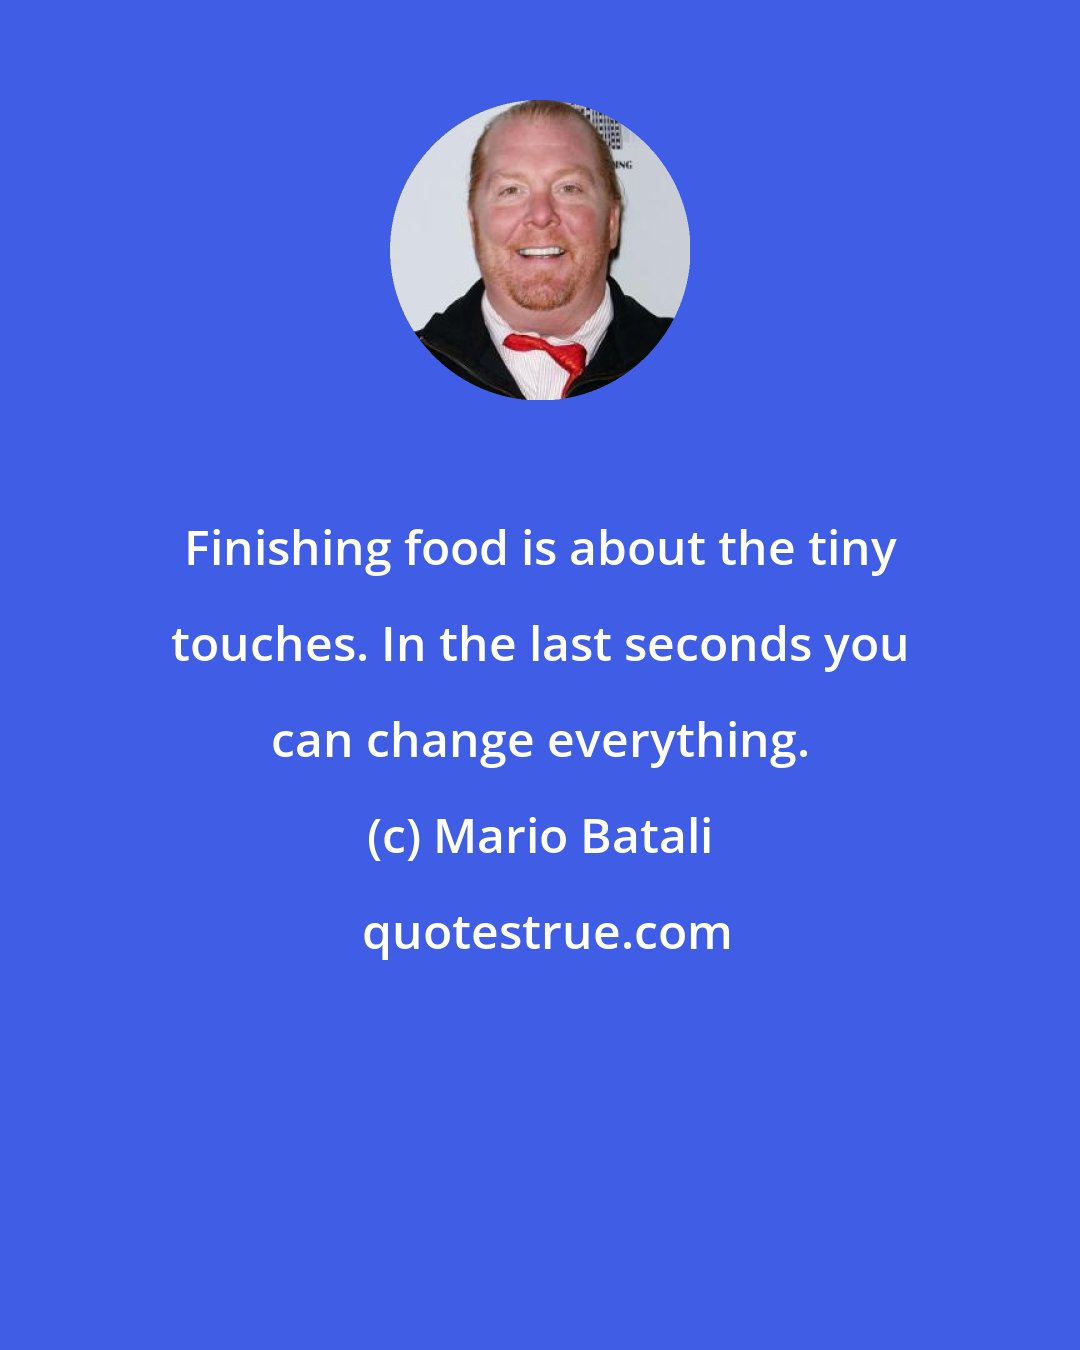 Mario Batali: Finishing food is about the tiny touches. In the last seconds you can change everything.